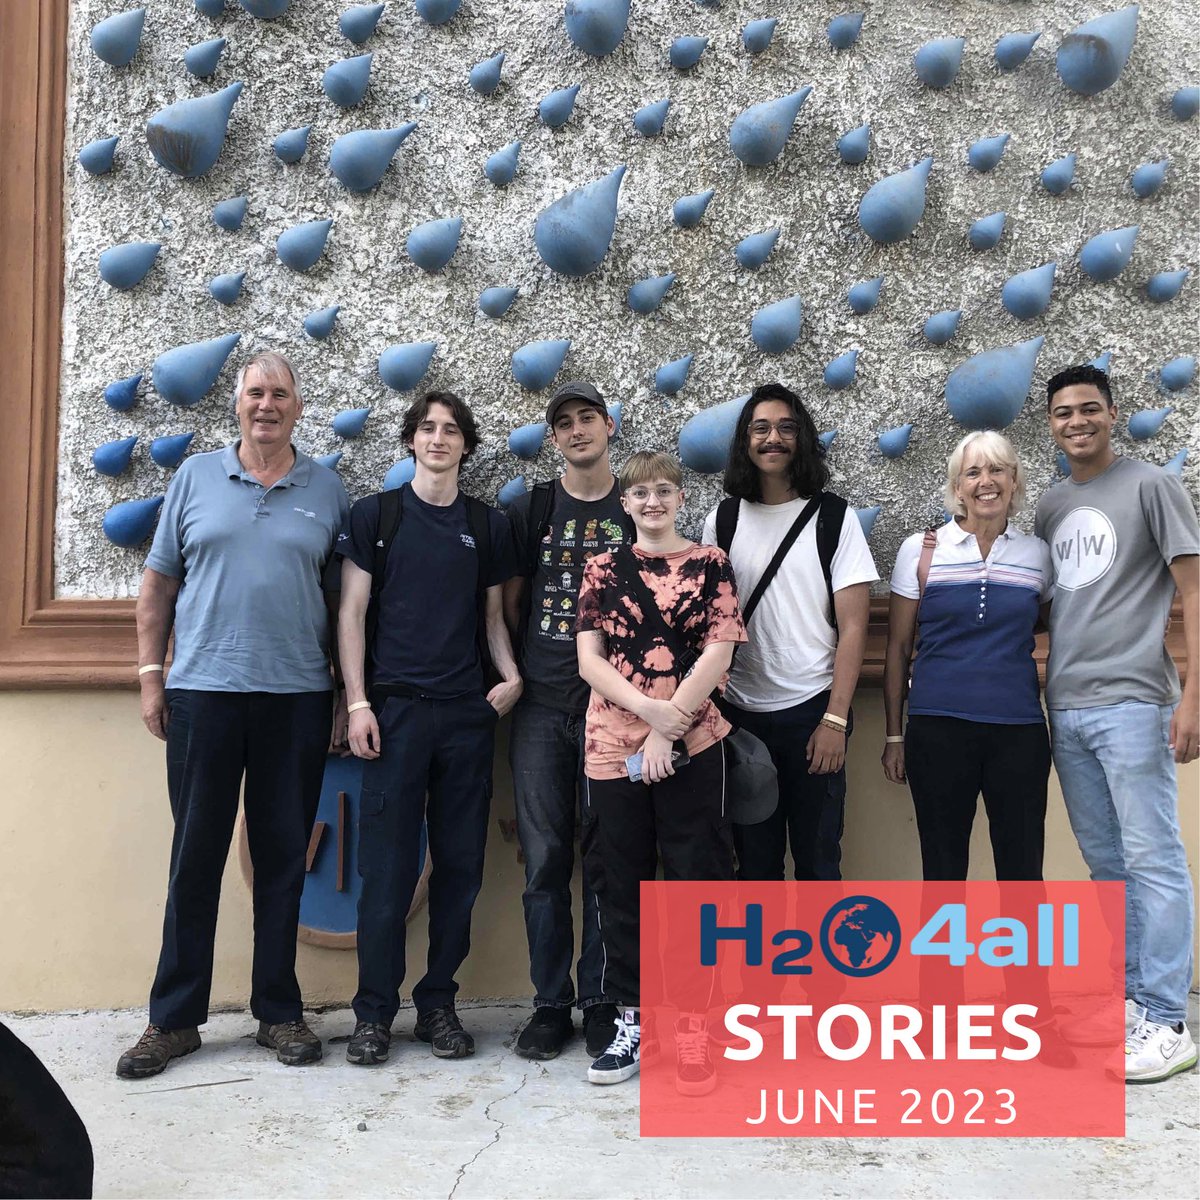 #H2O4ALLStories | Check out our June newsletter here: eepurl.com/iuccqw

#safewaterforall #safewater #water #newsletter #waterislife